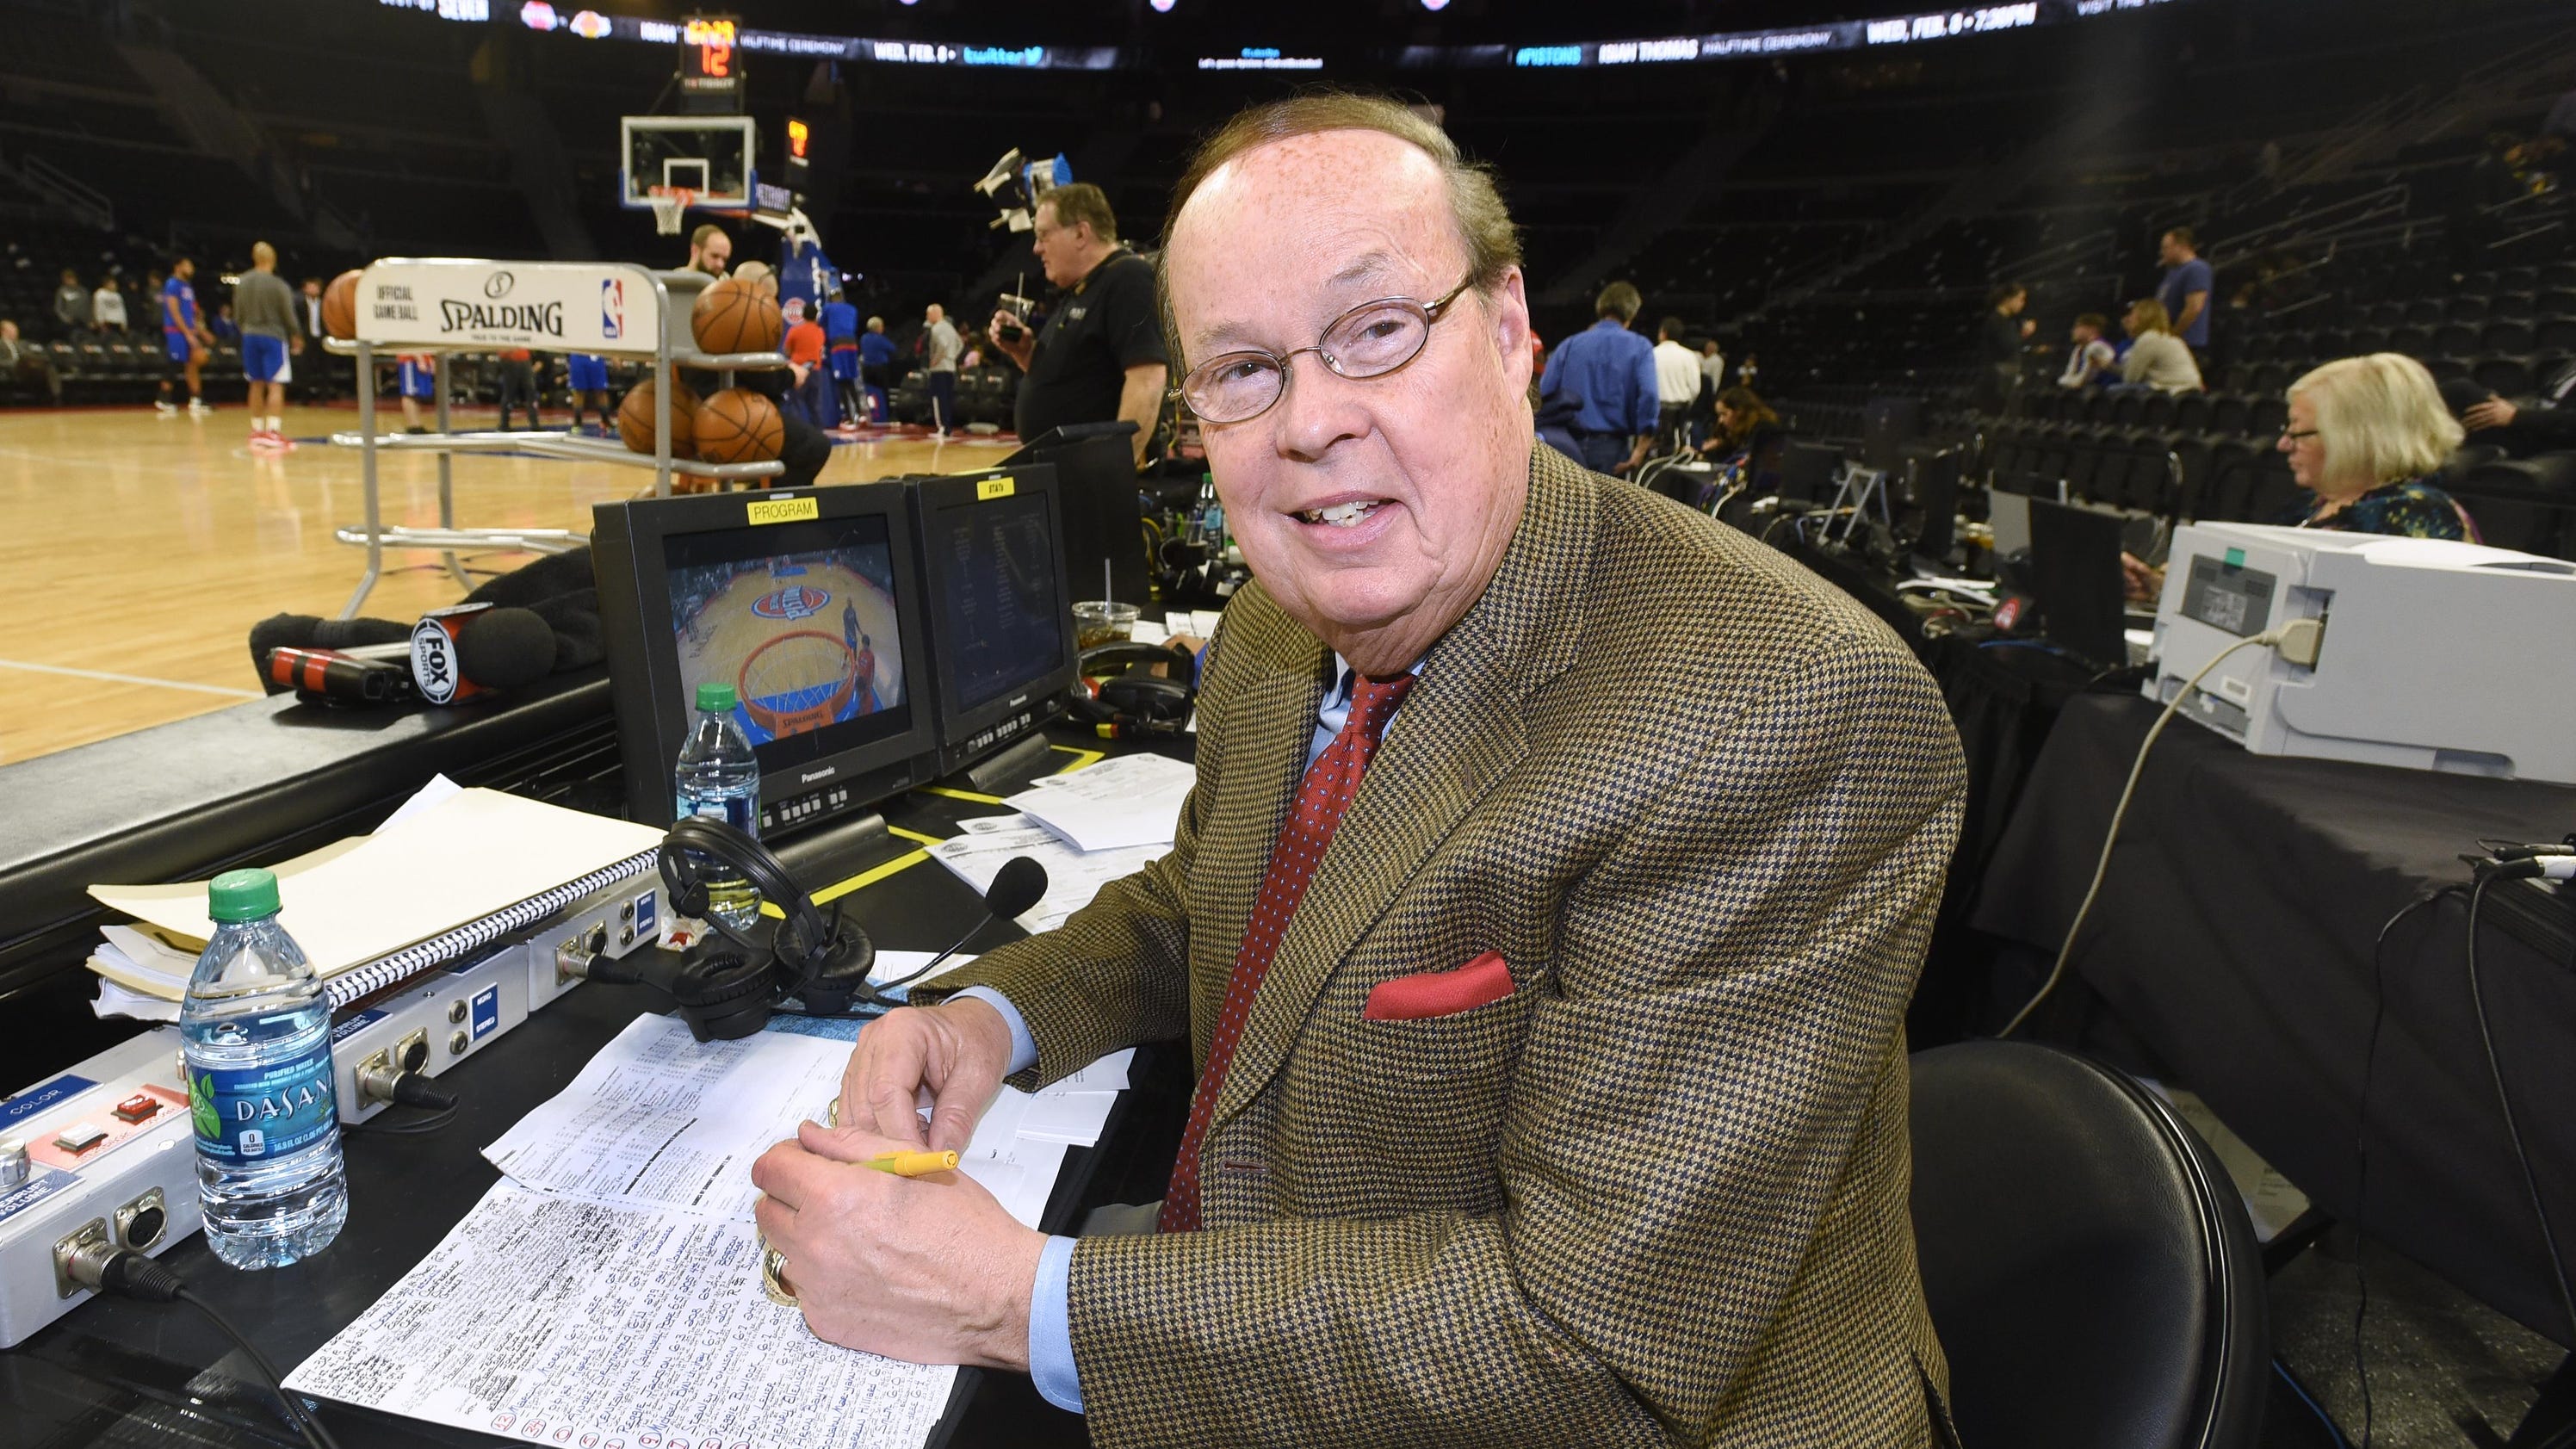 Blaha, voice of Pistons, still going strong at 71